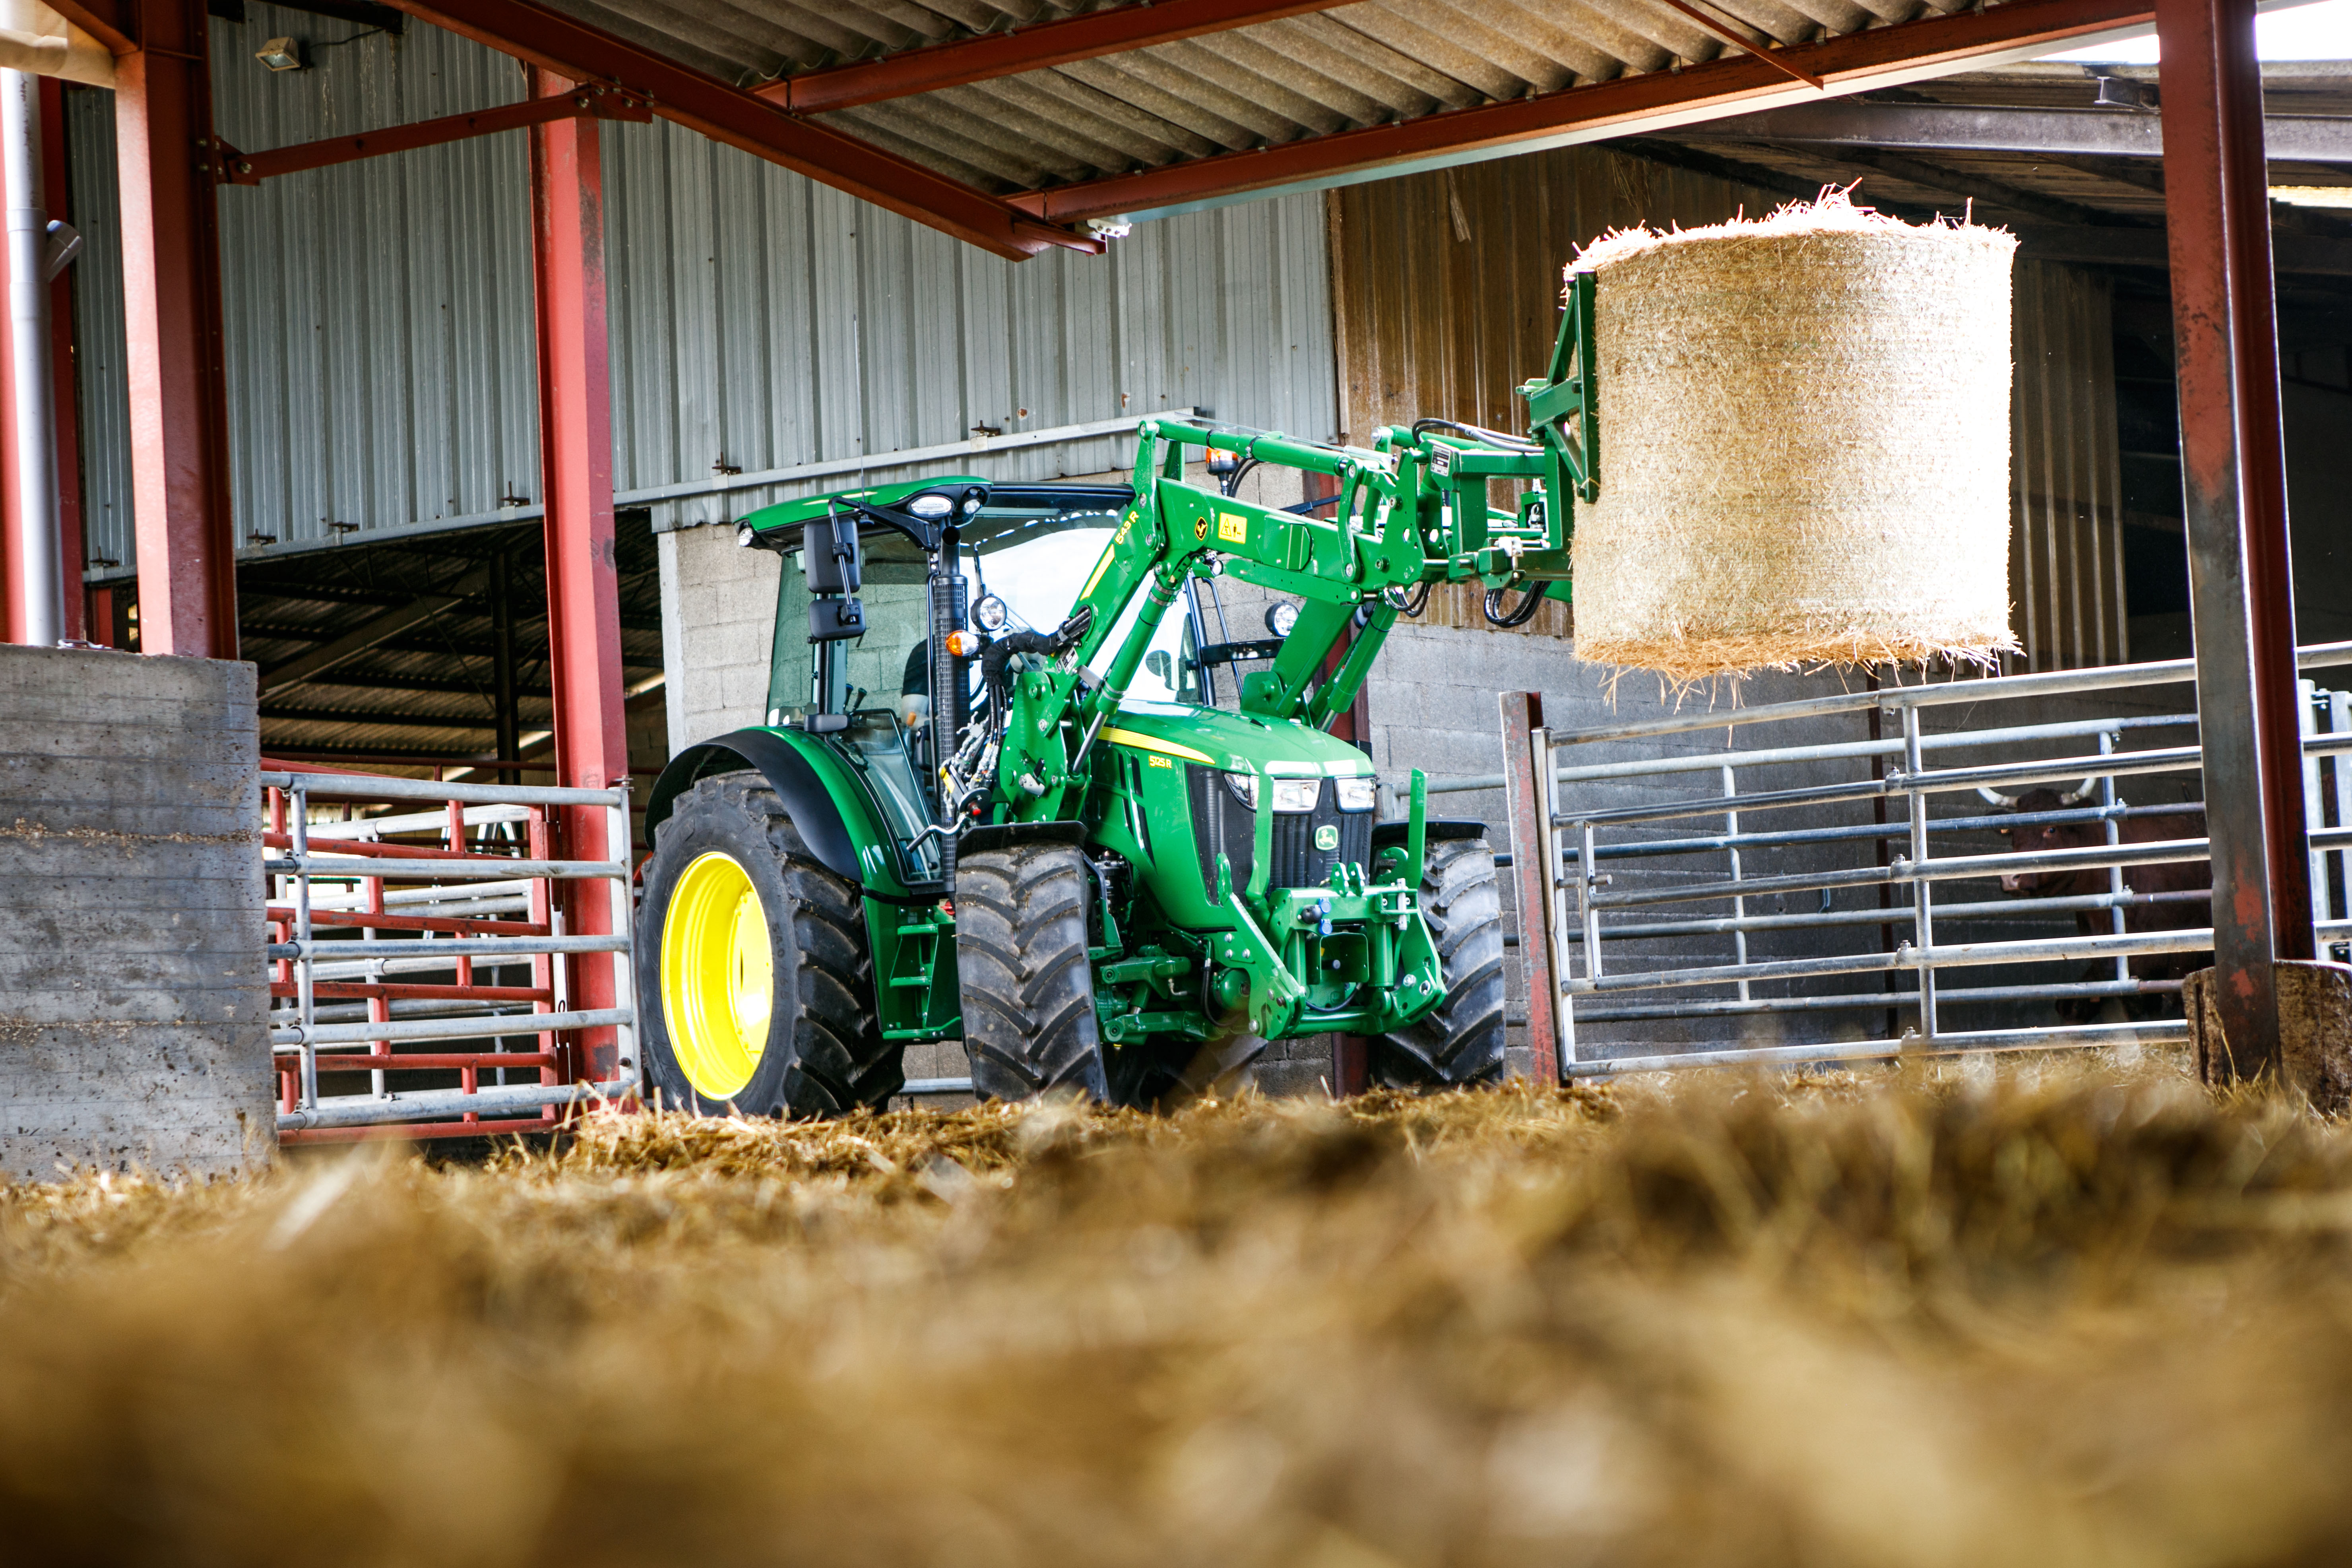 The new John Deere 5125R tractor with 543R front loader.